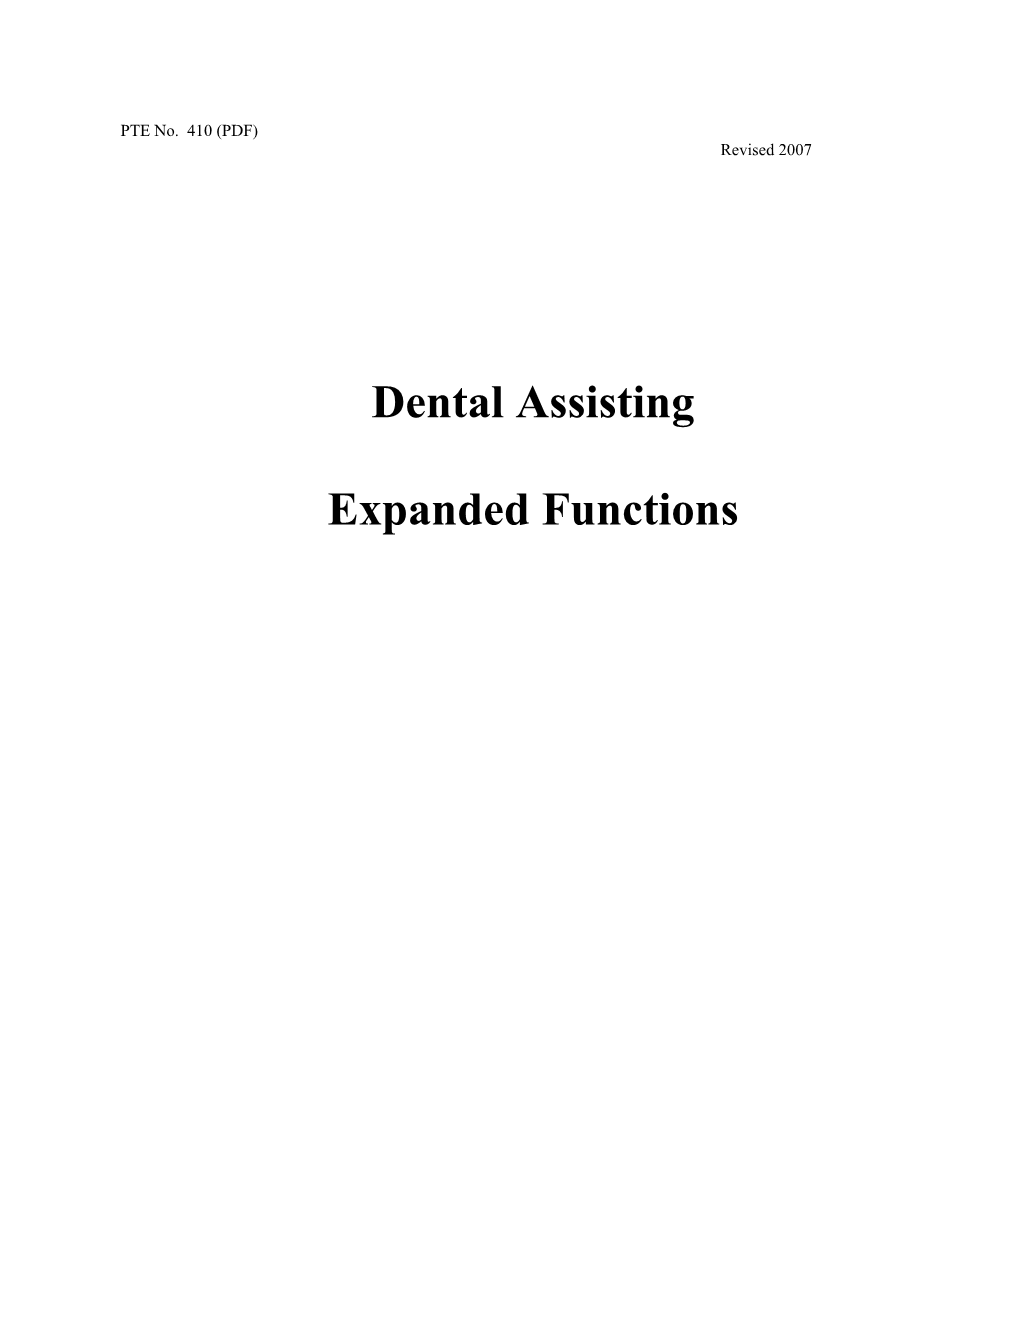 Dental Assisting Expanded Functions